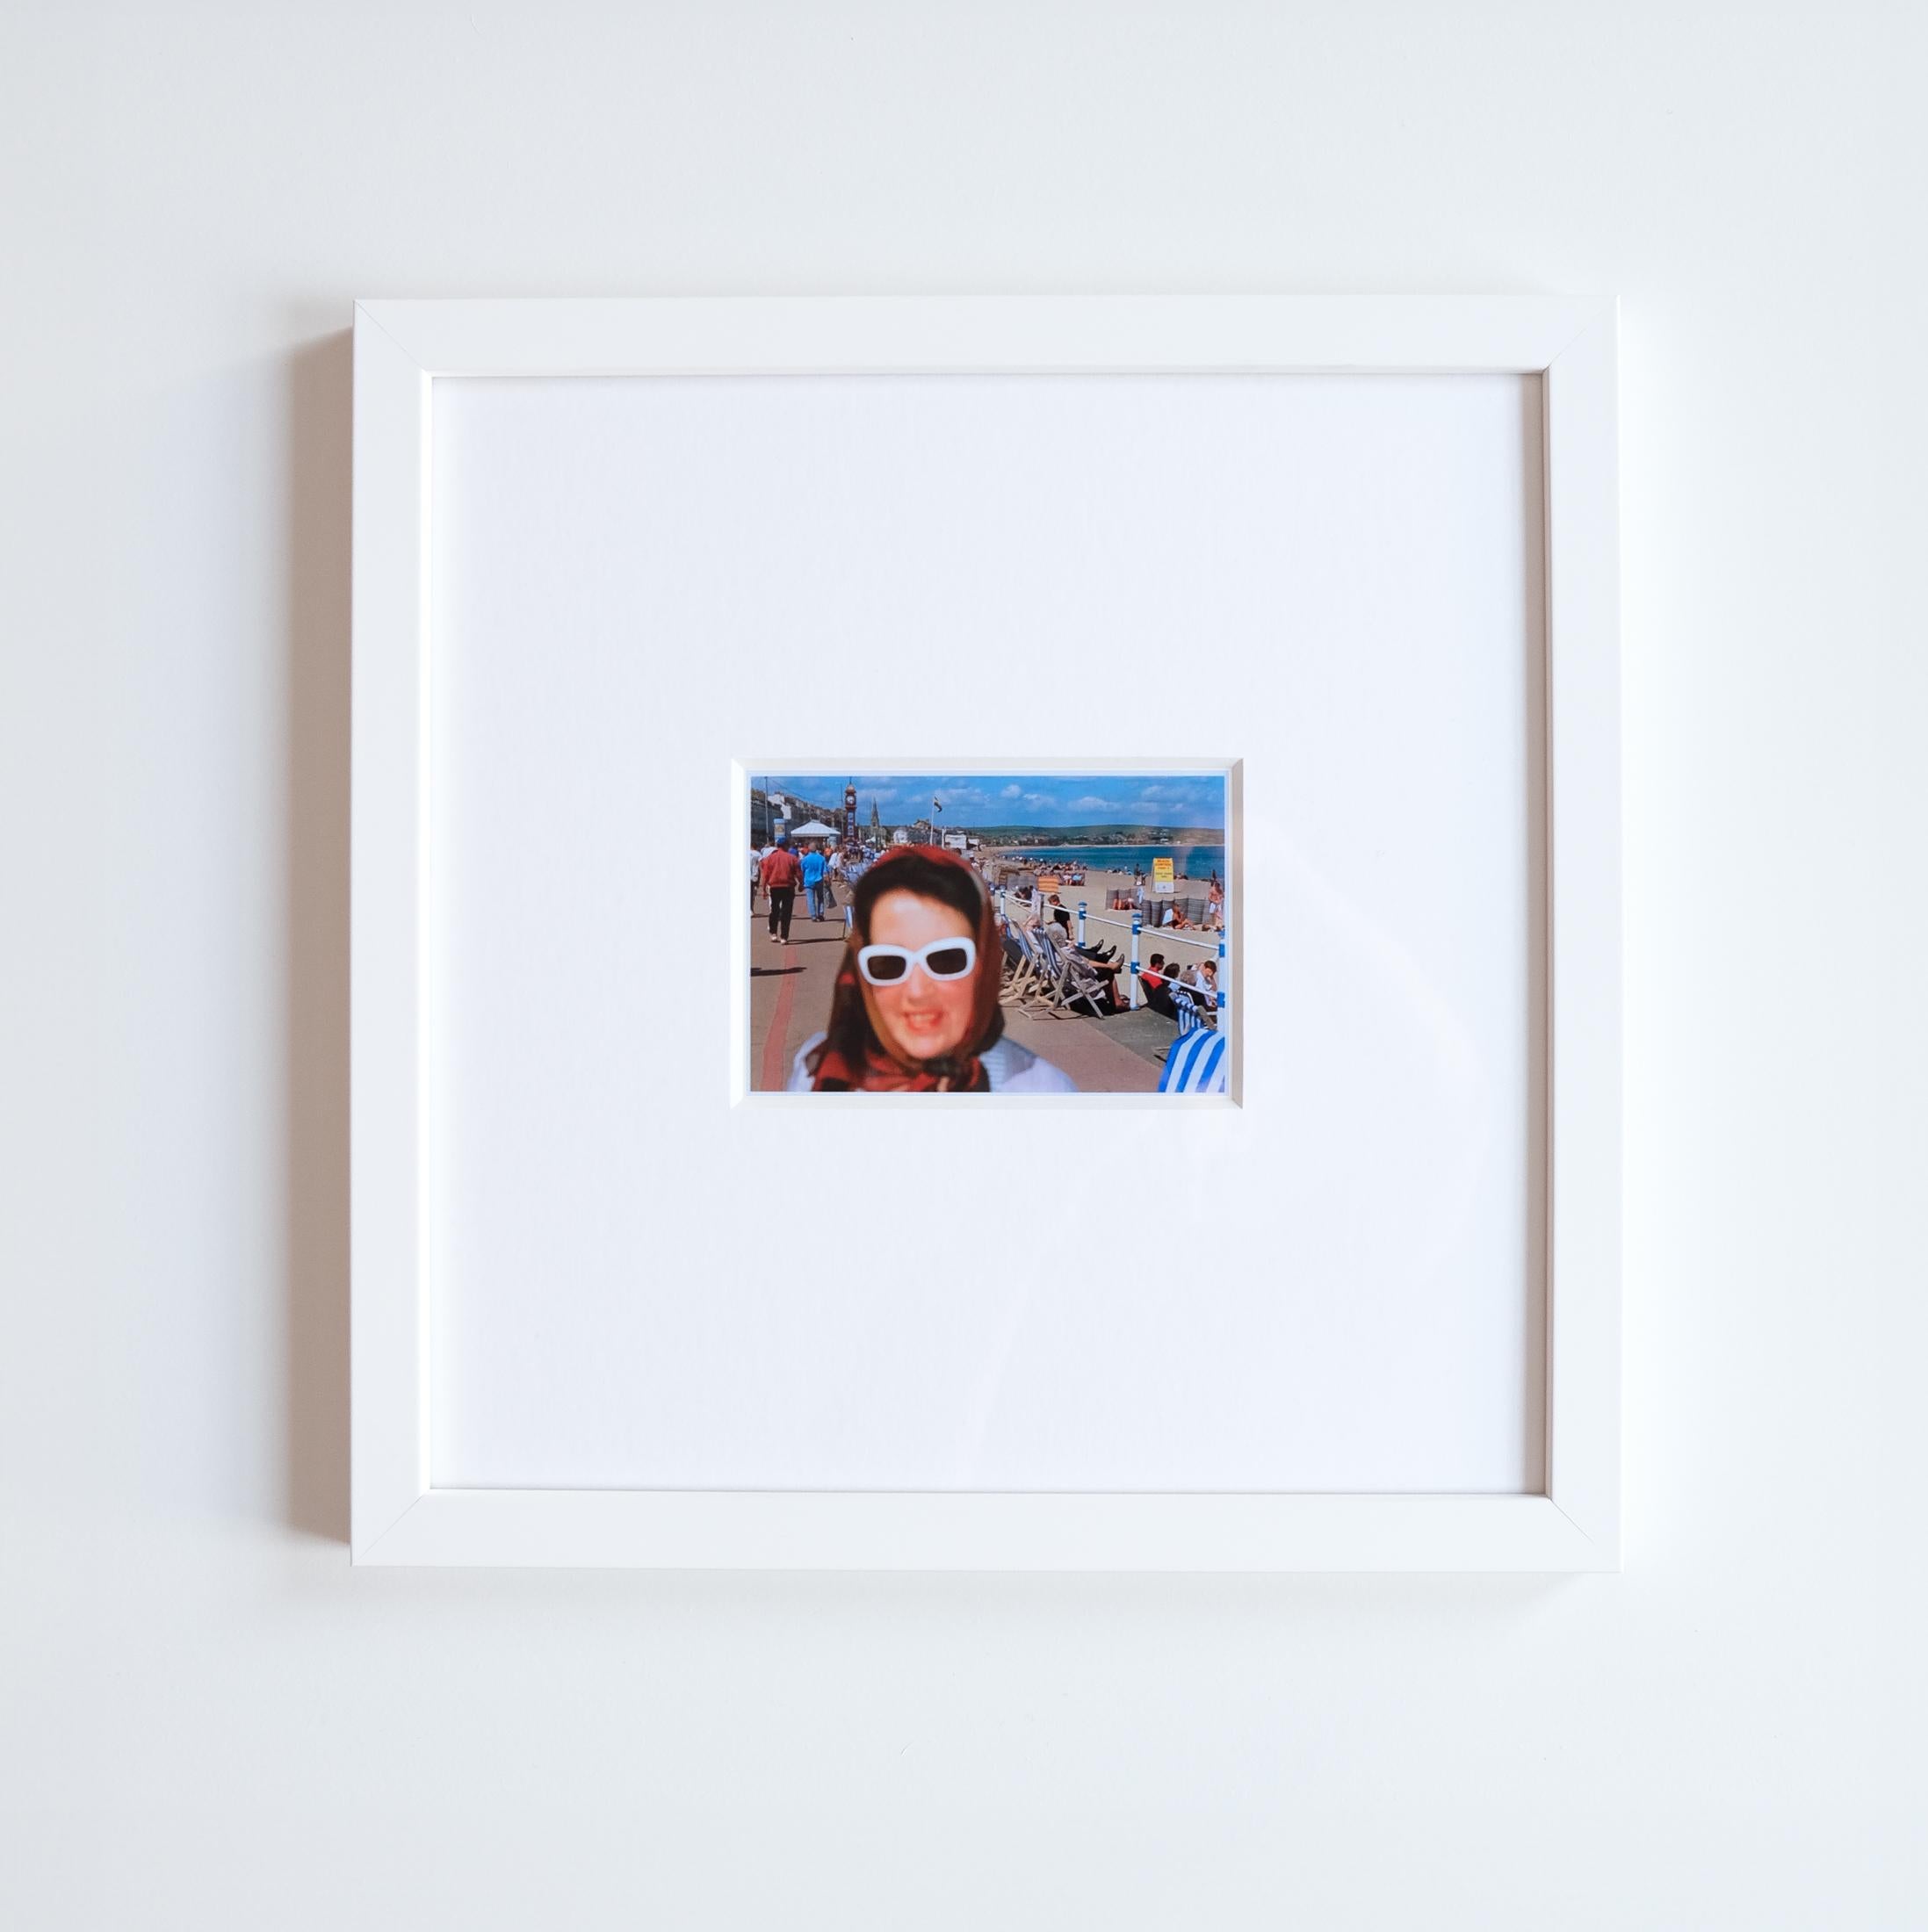 For sale an original signed edition museum-quality Magnum 6x6 photographic print by MARTIN PARR (British, born 1952). 

Titled 